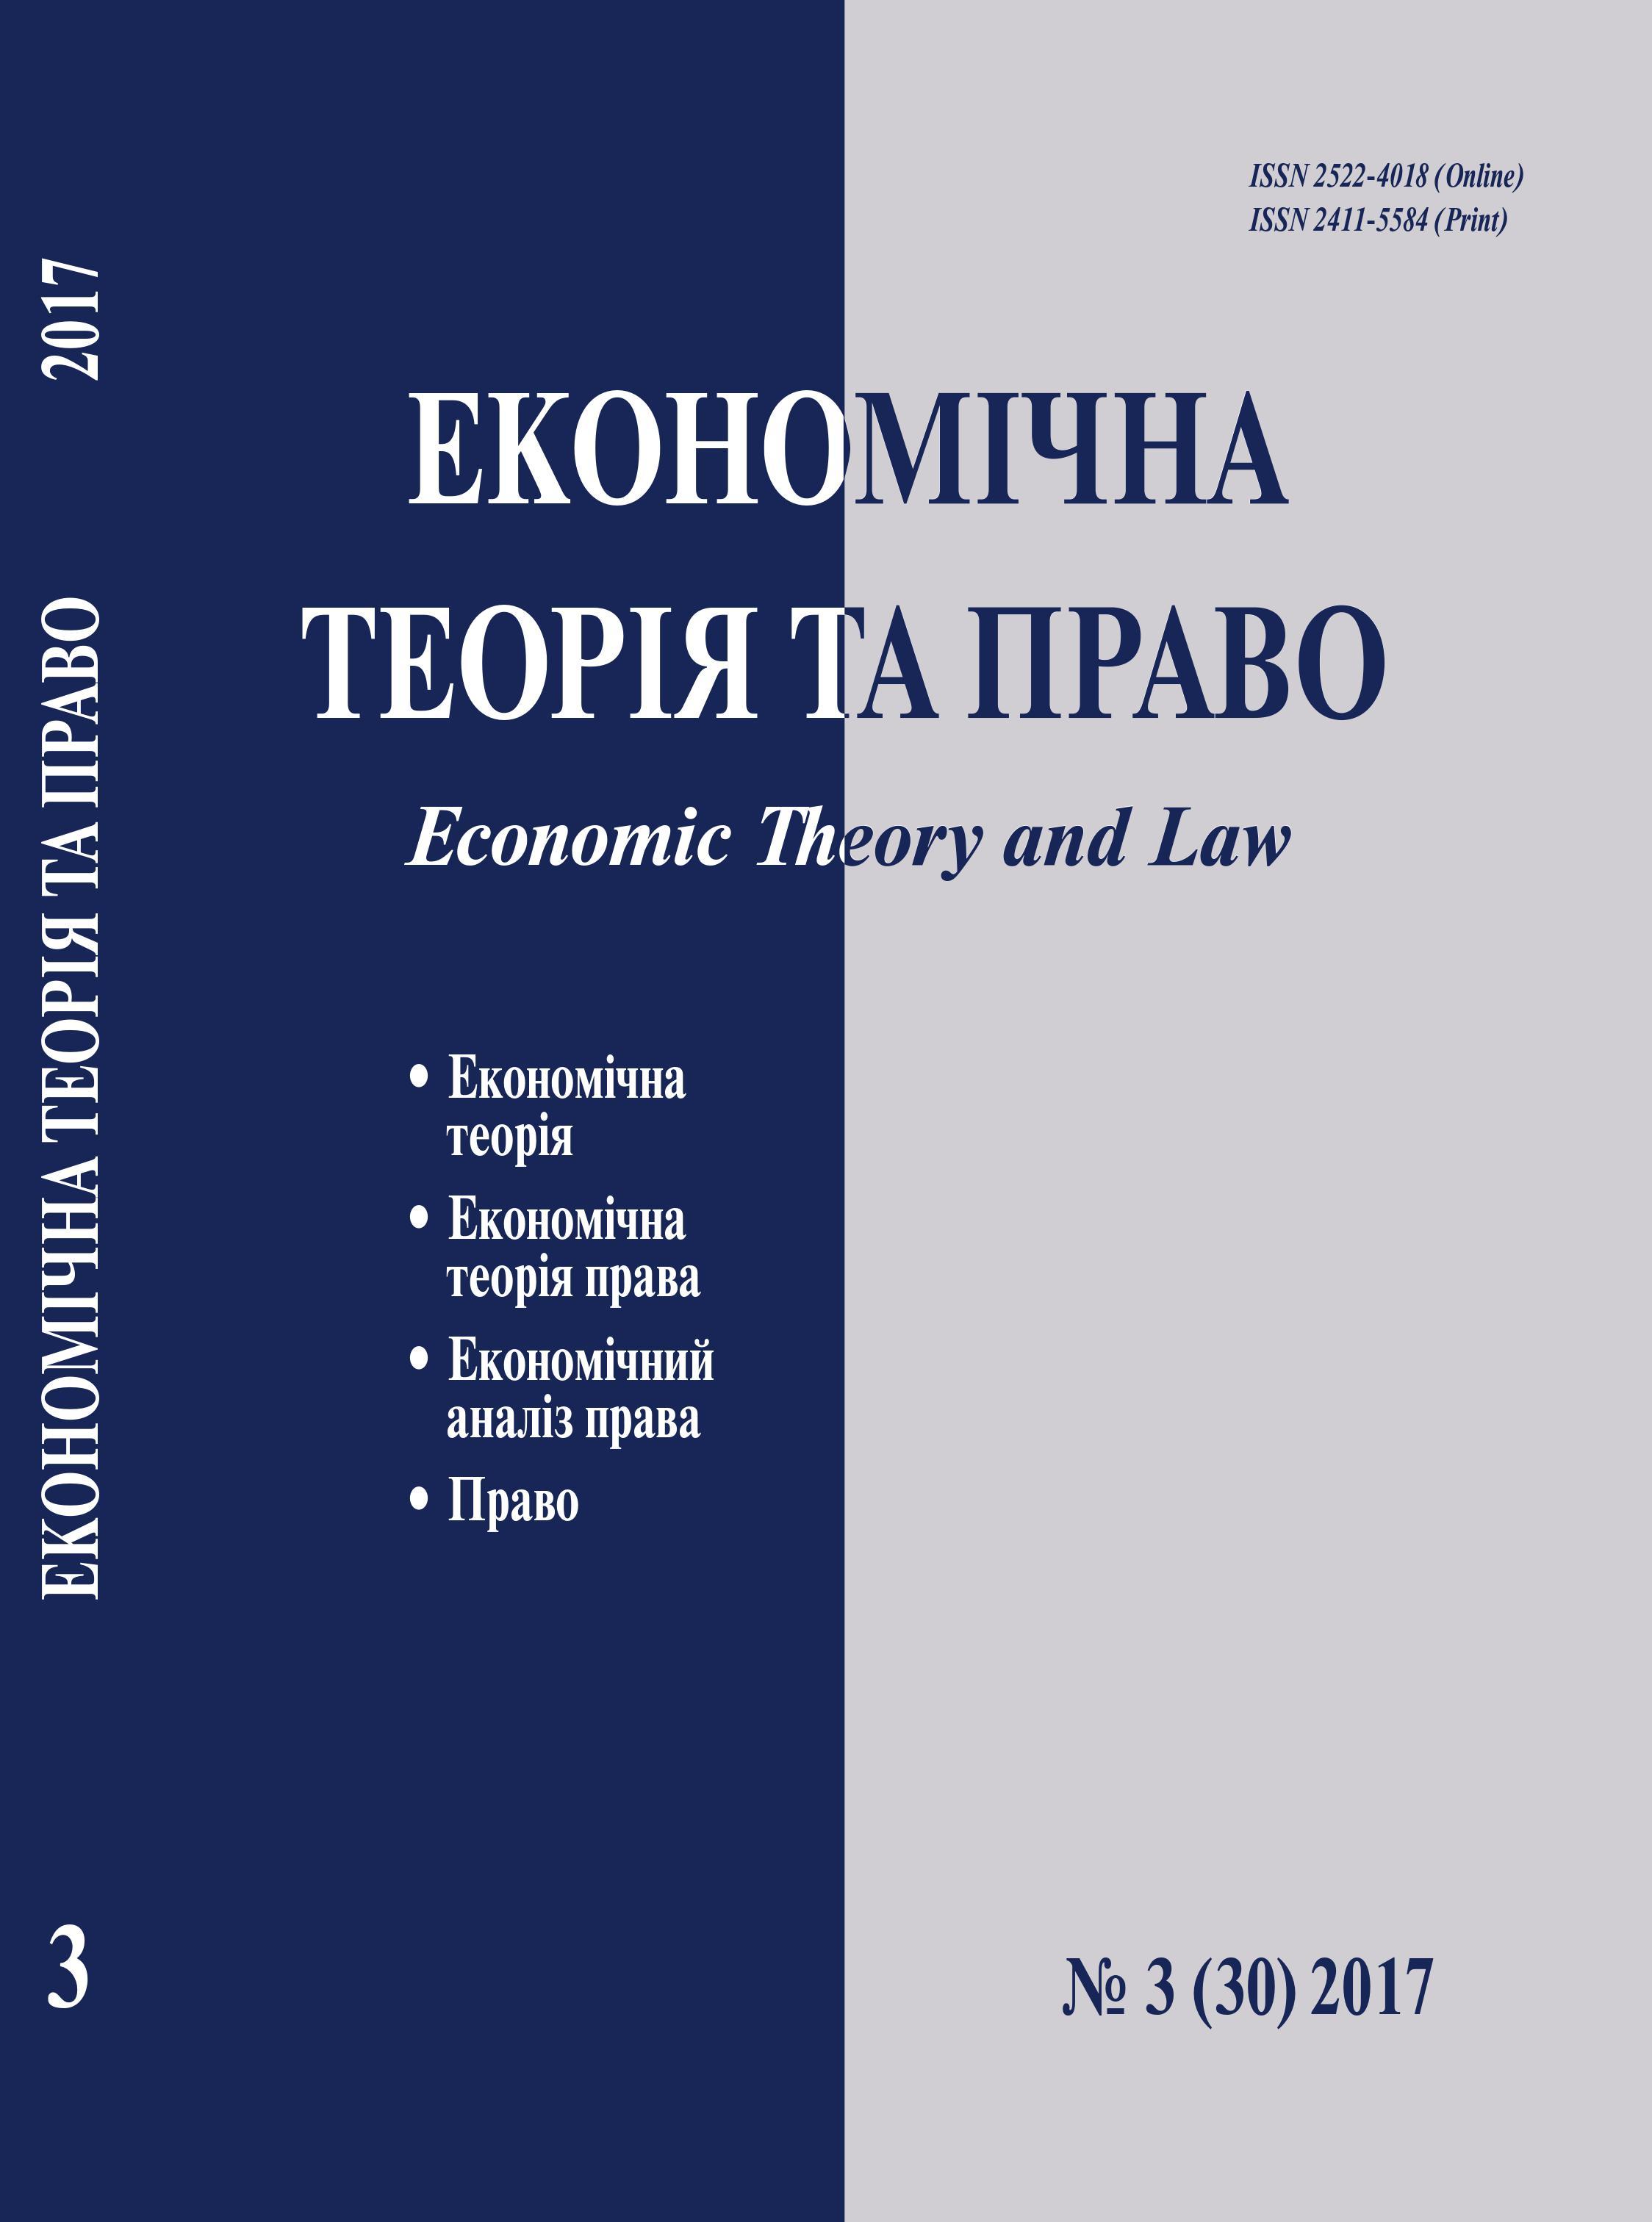 Economic Theory and Law